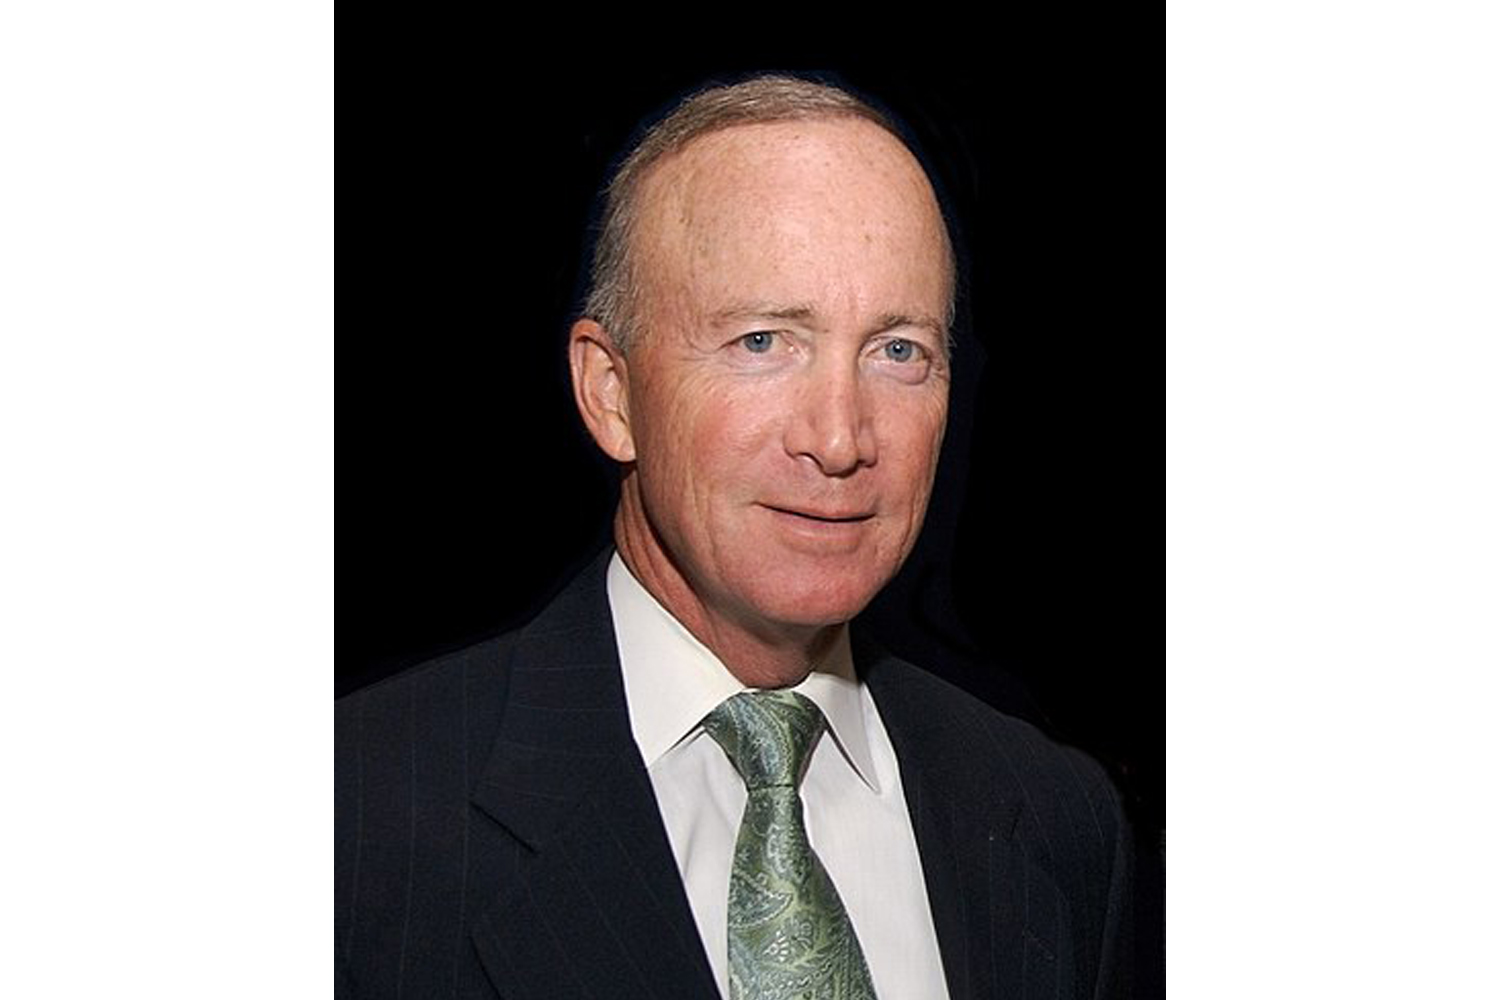 Purdue President and former Indiana Gov. Mitch Daniels.